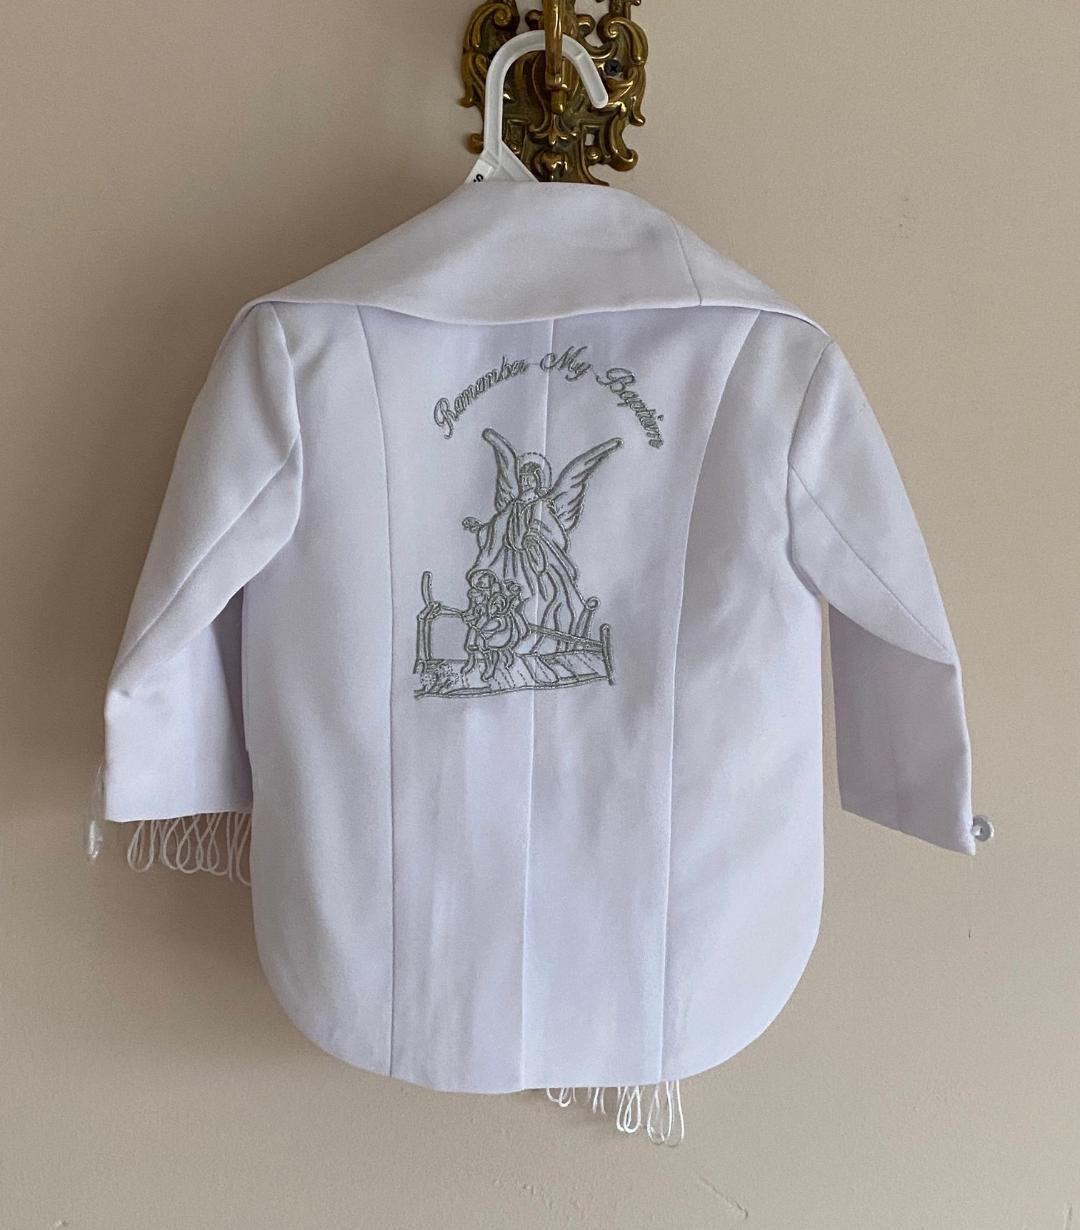 Baby Toddler Boys Easter Christening Baptism Tuxedo Suits White Cross small to 4t